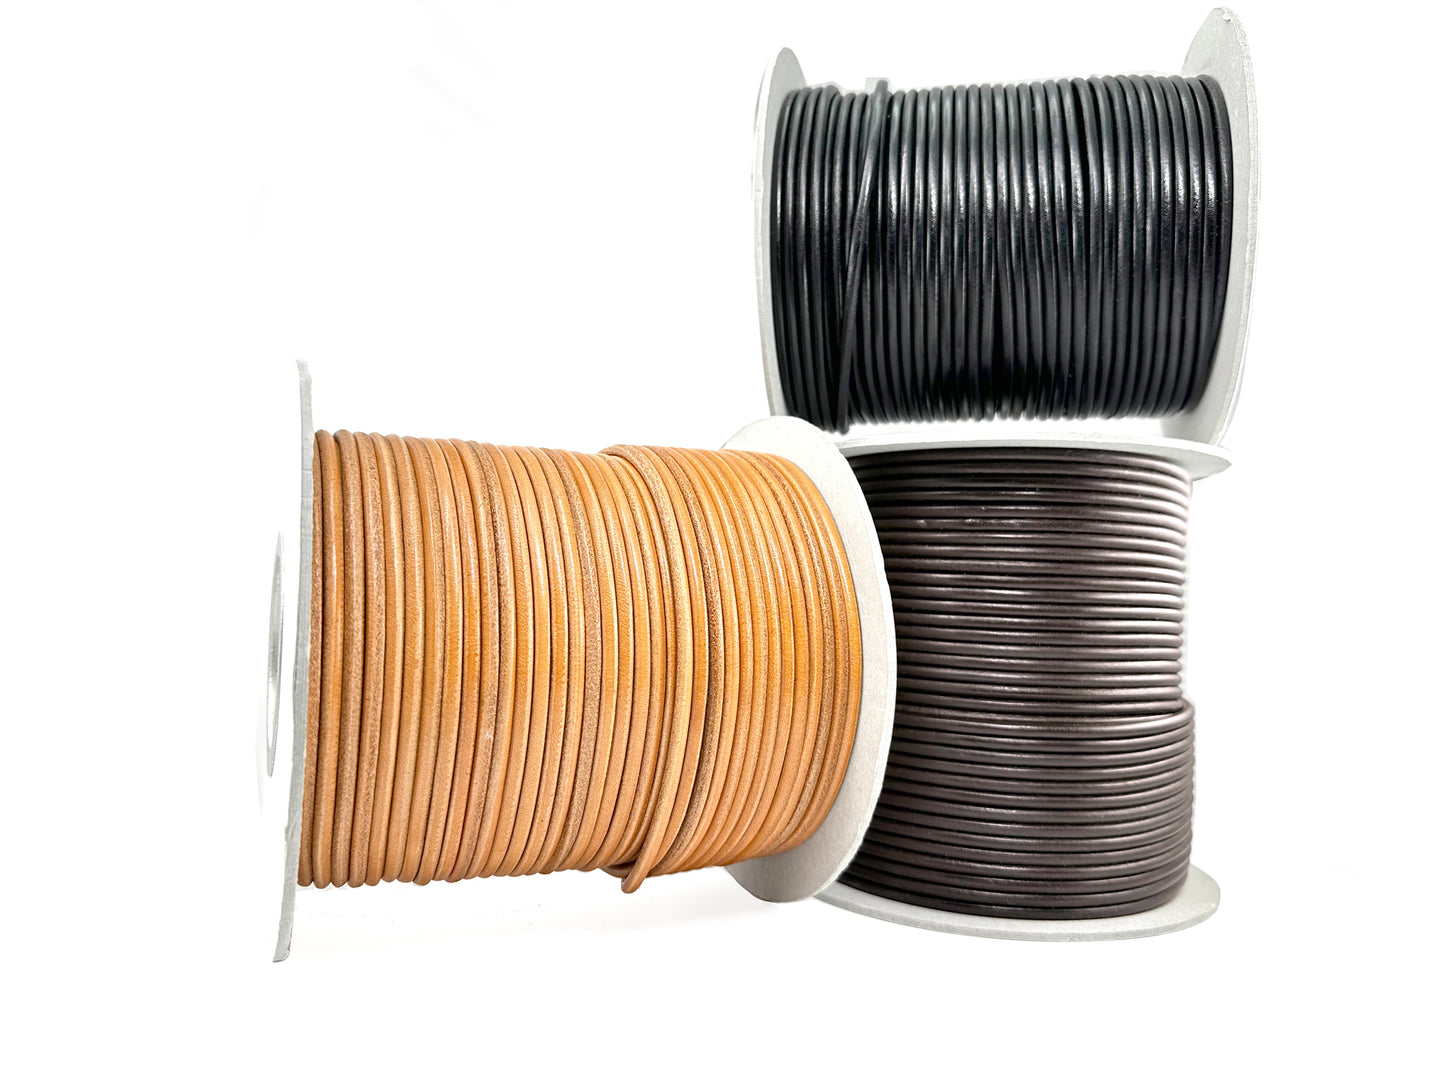 Domestic cowhide tanned round cord 4mmΦ Sold in 1M units